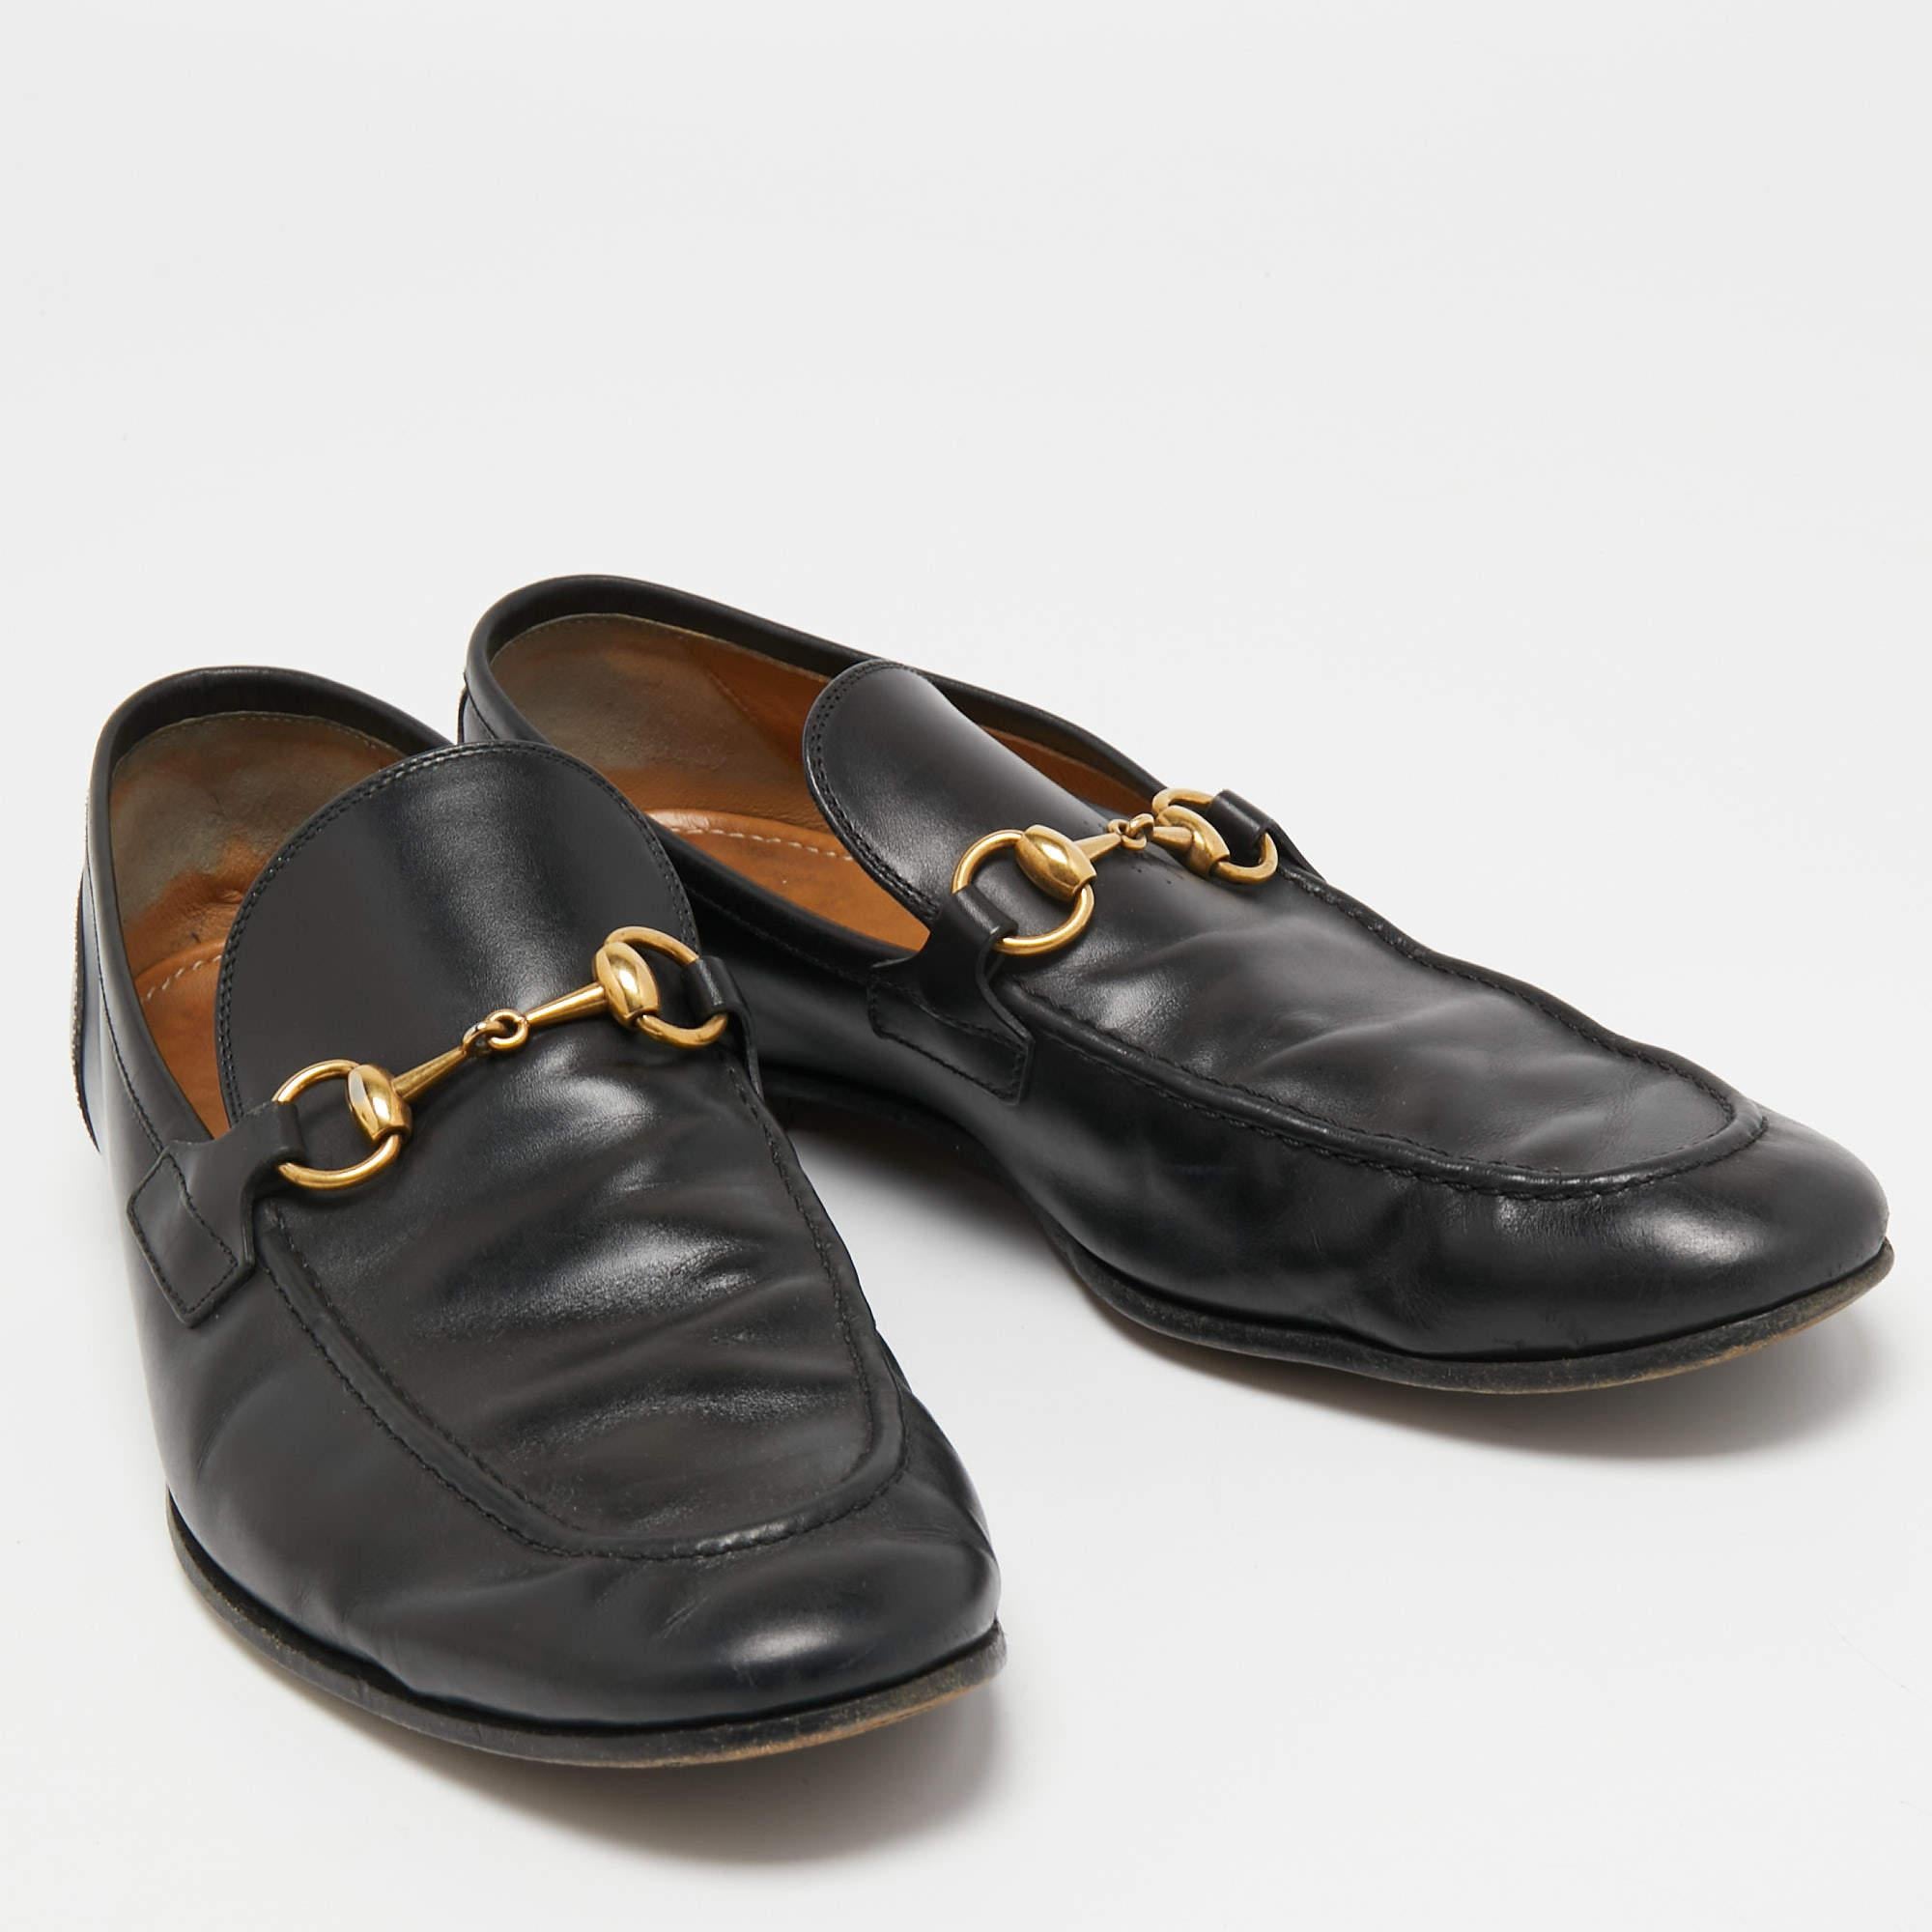 Gucci Black Leather Jordaan Loafers Size 43 1